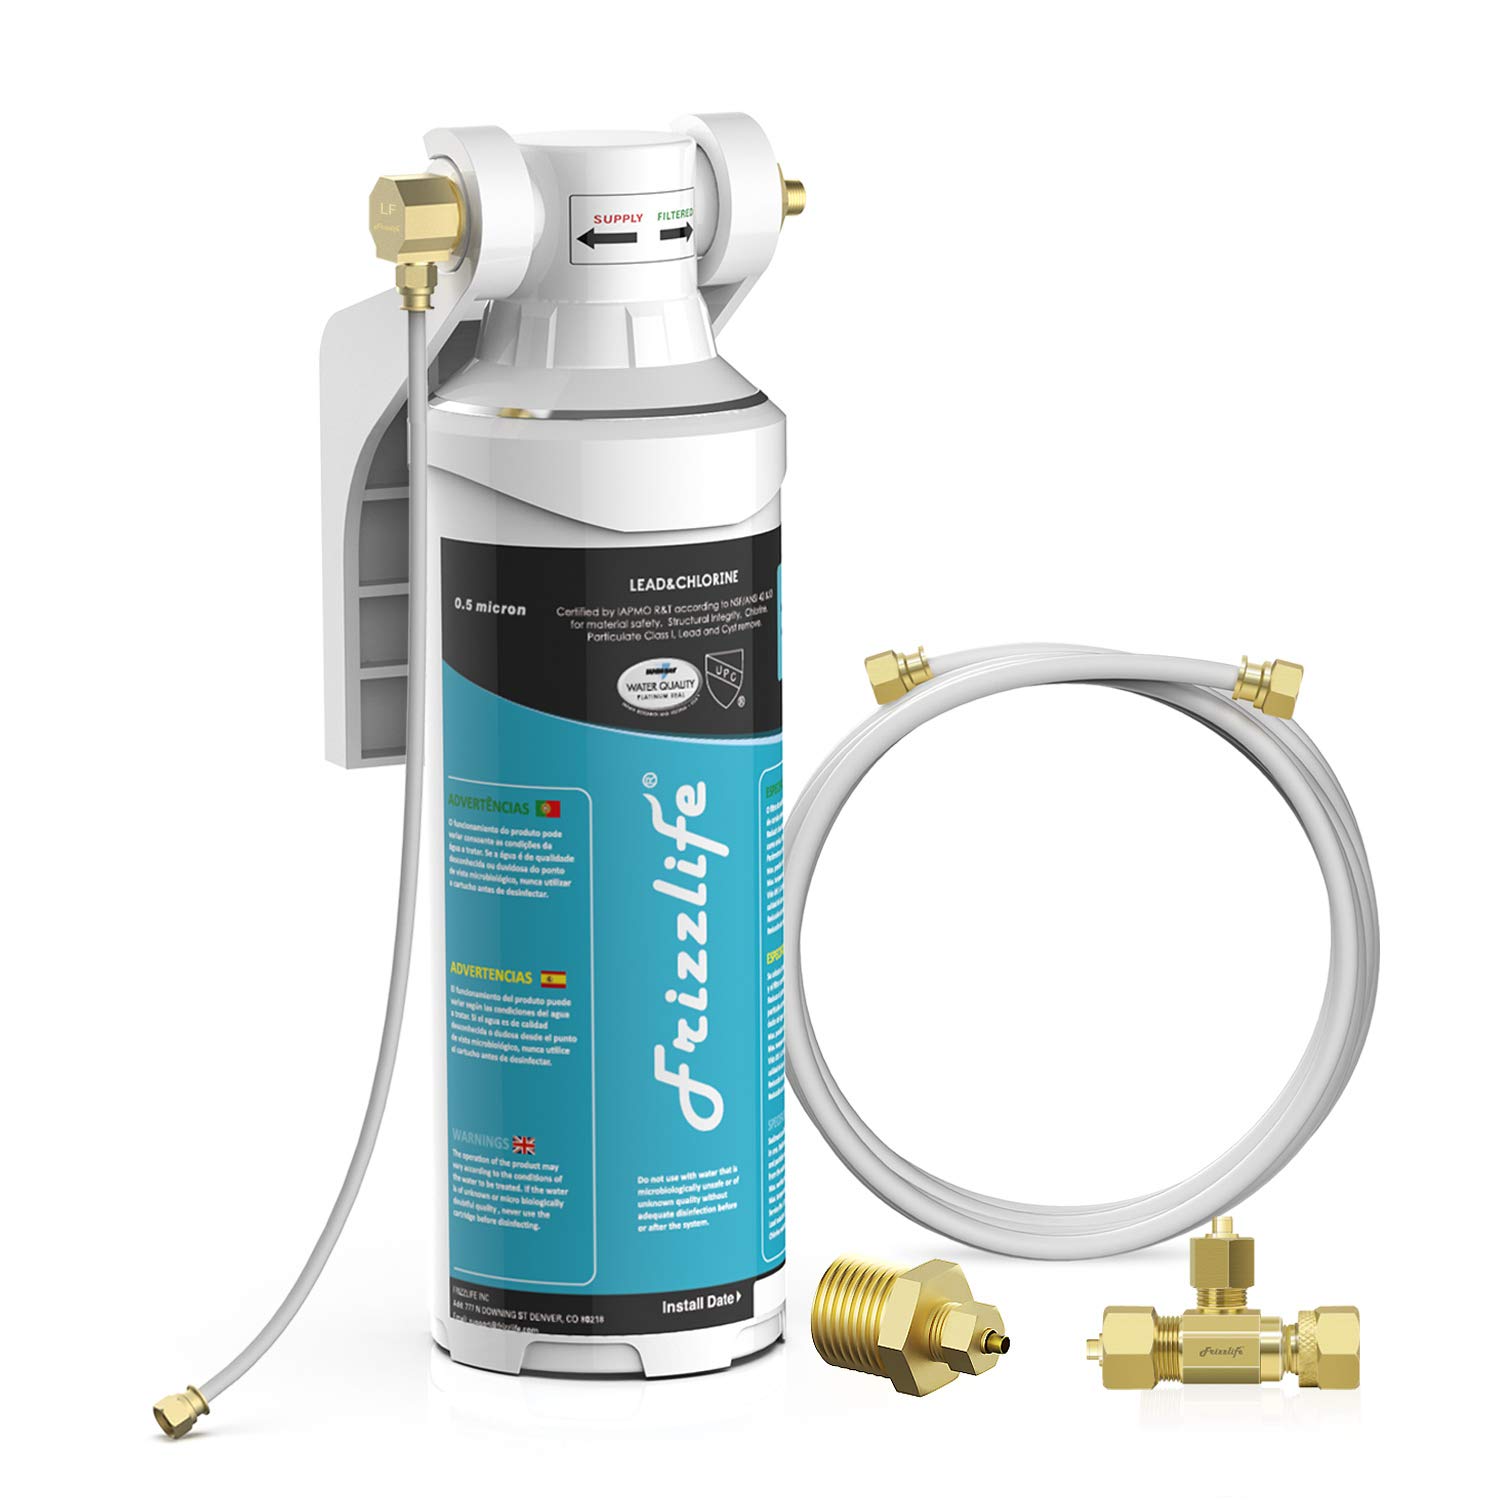 Frizzlife MS99 Inline Water Filter System for Refrigerator, Ice Maker, Under Sink - image 1 of 6